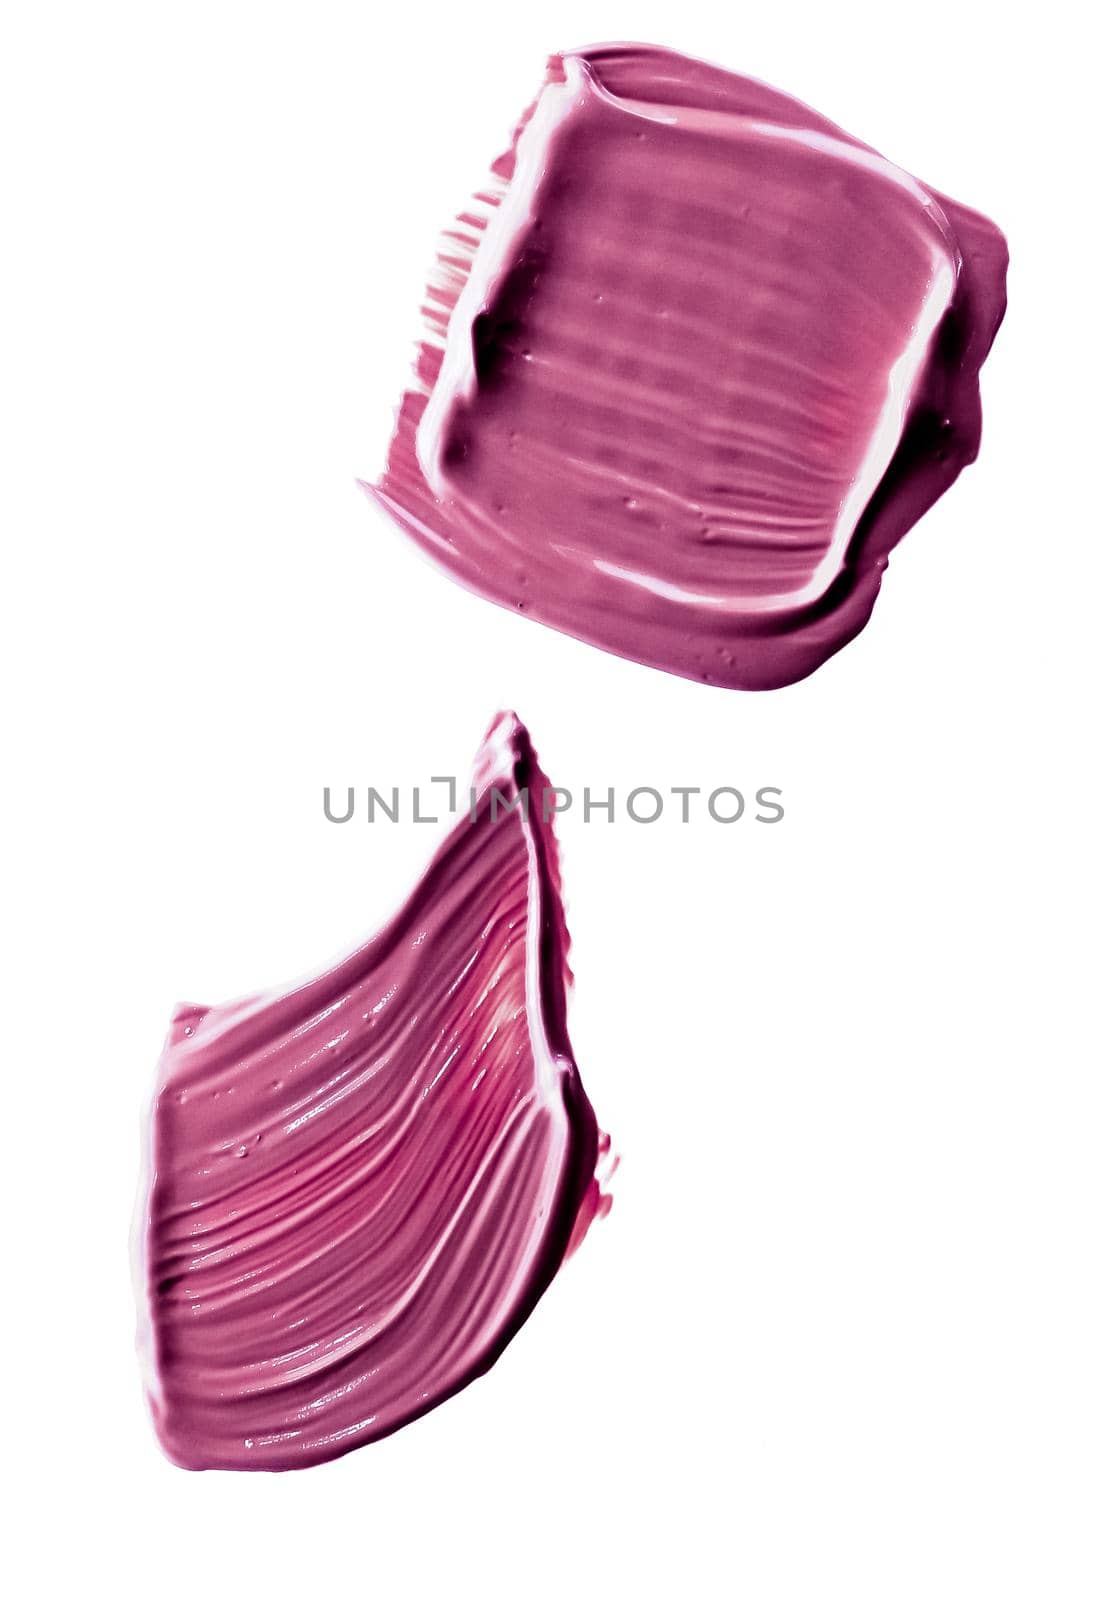 Cosmetic products, fashion and beauty concept - Lipstick smudge texture isolated on white background, art of make-up